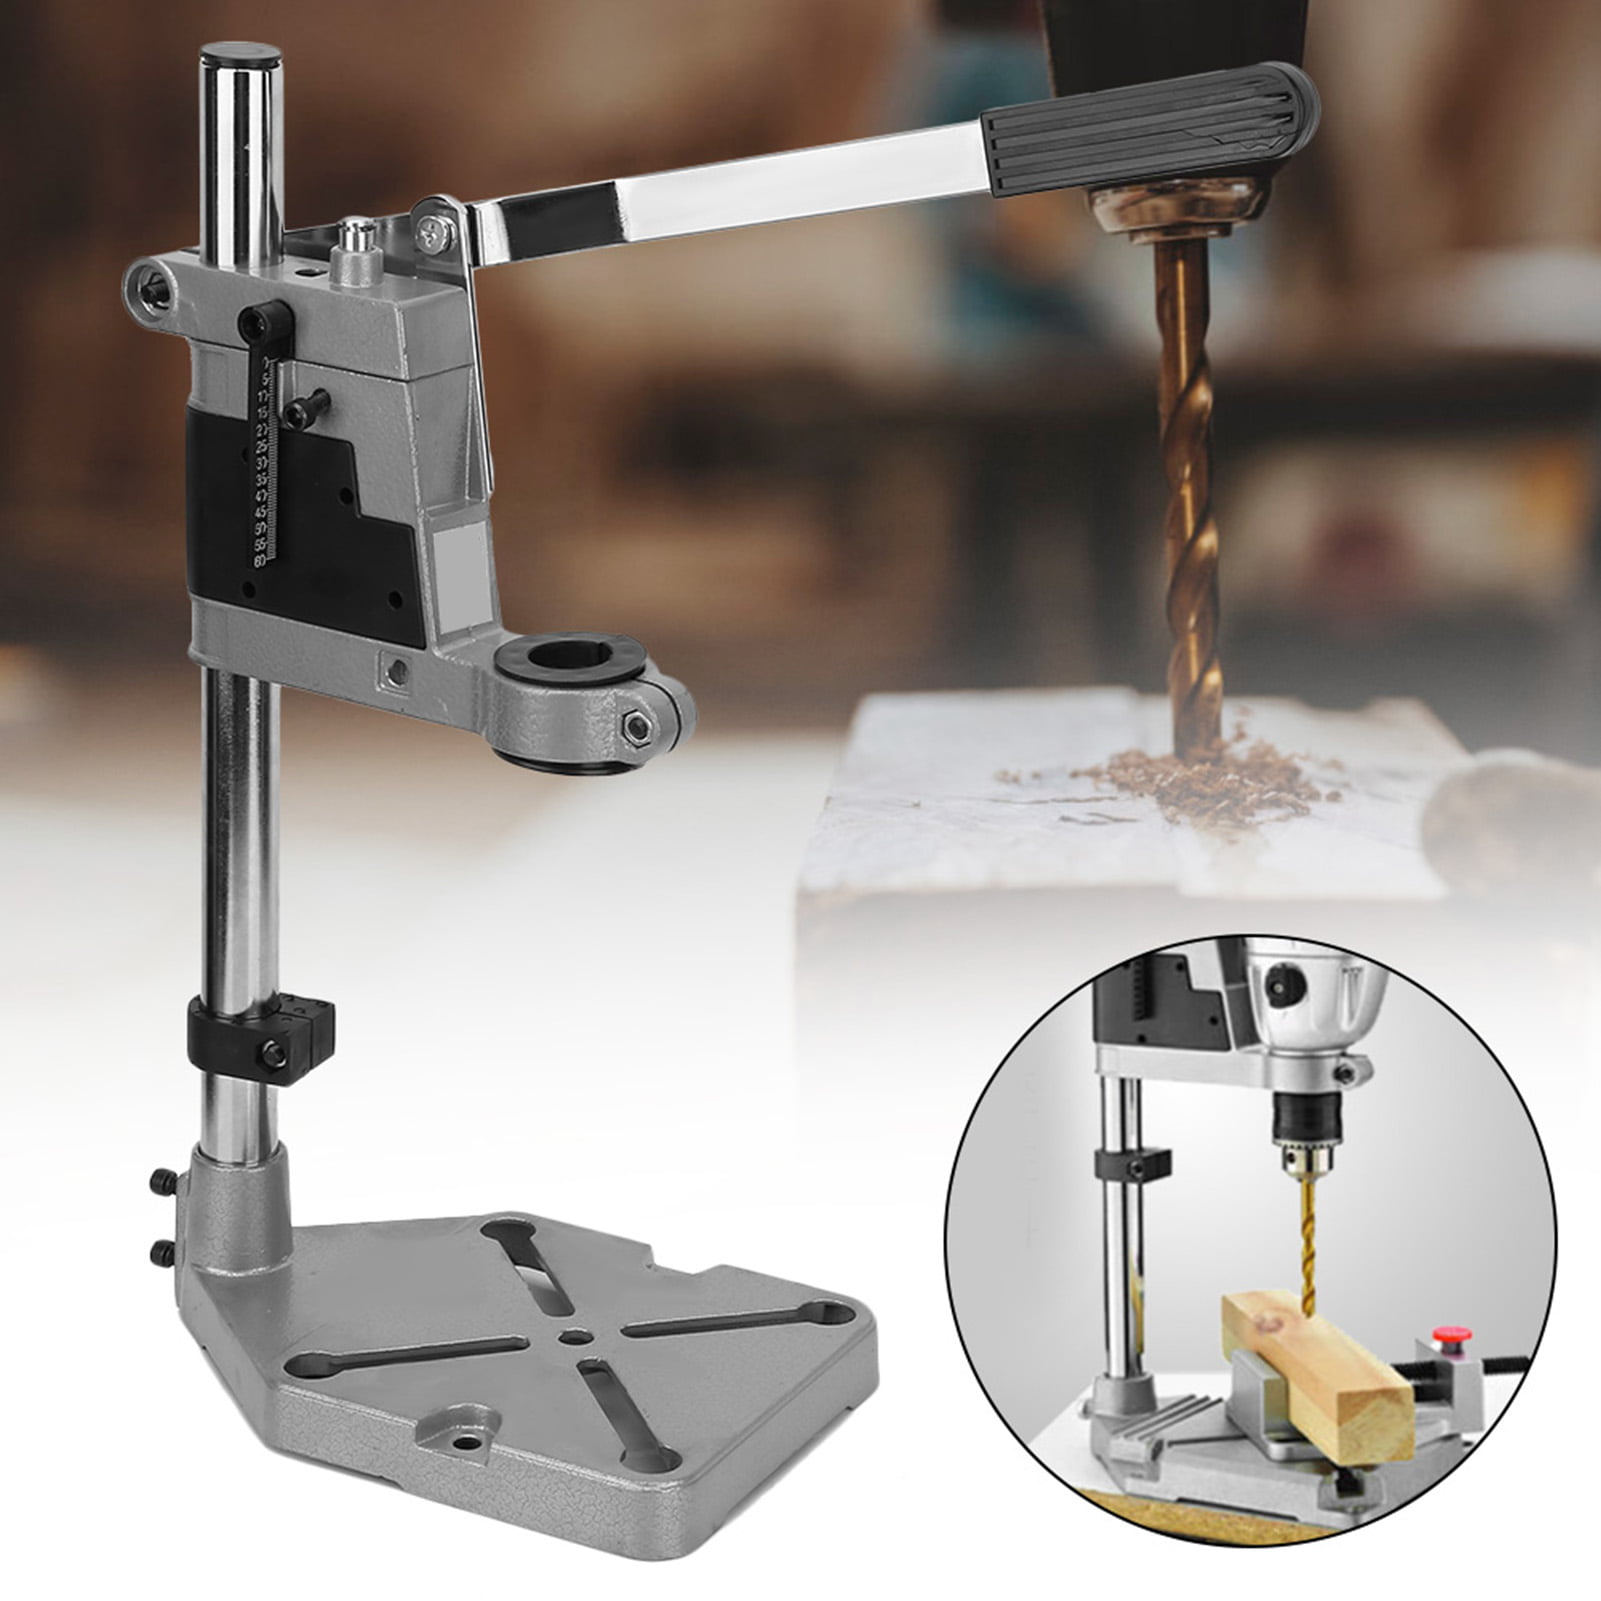 Green_Store7978 Universal Bench Clamp Drill Press Stand Workbench Repair Tool for Drilling TOP 